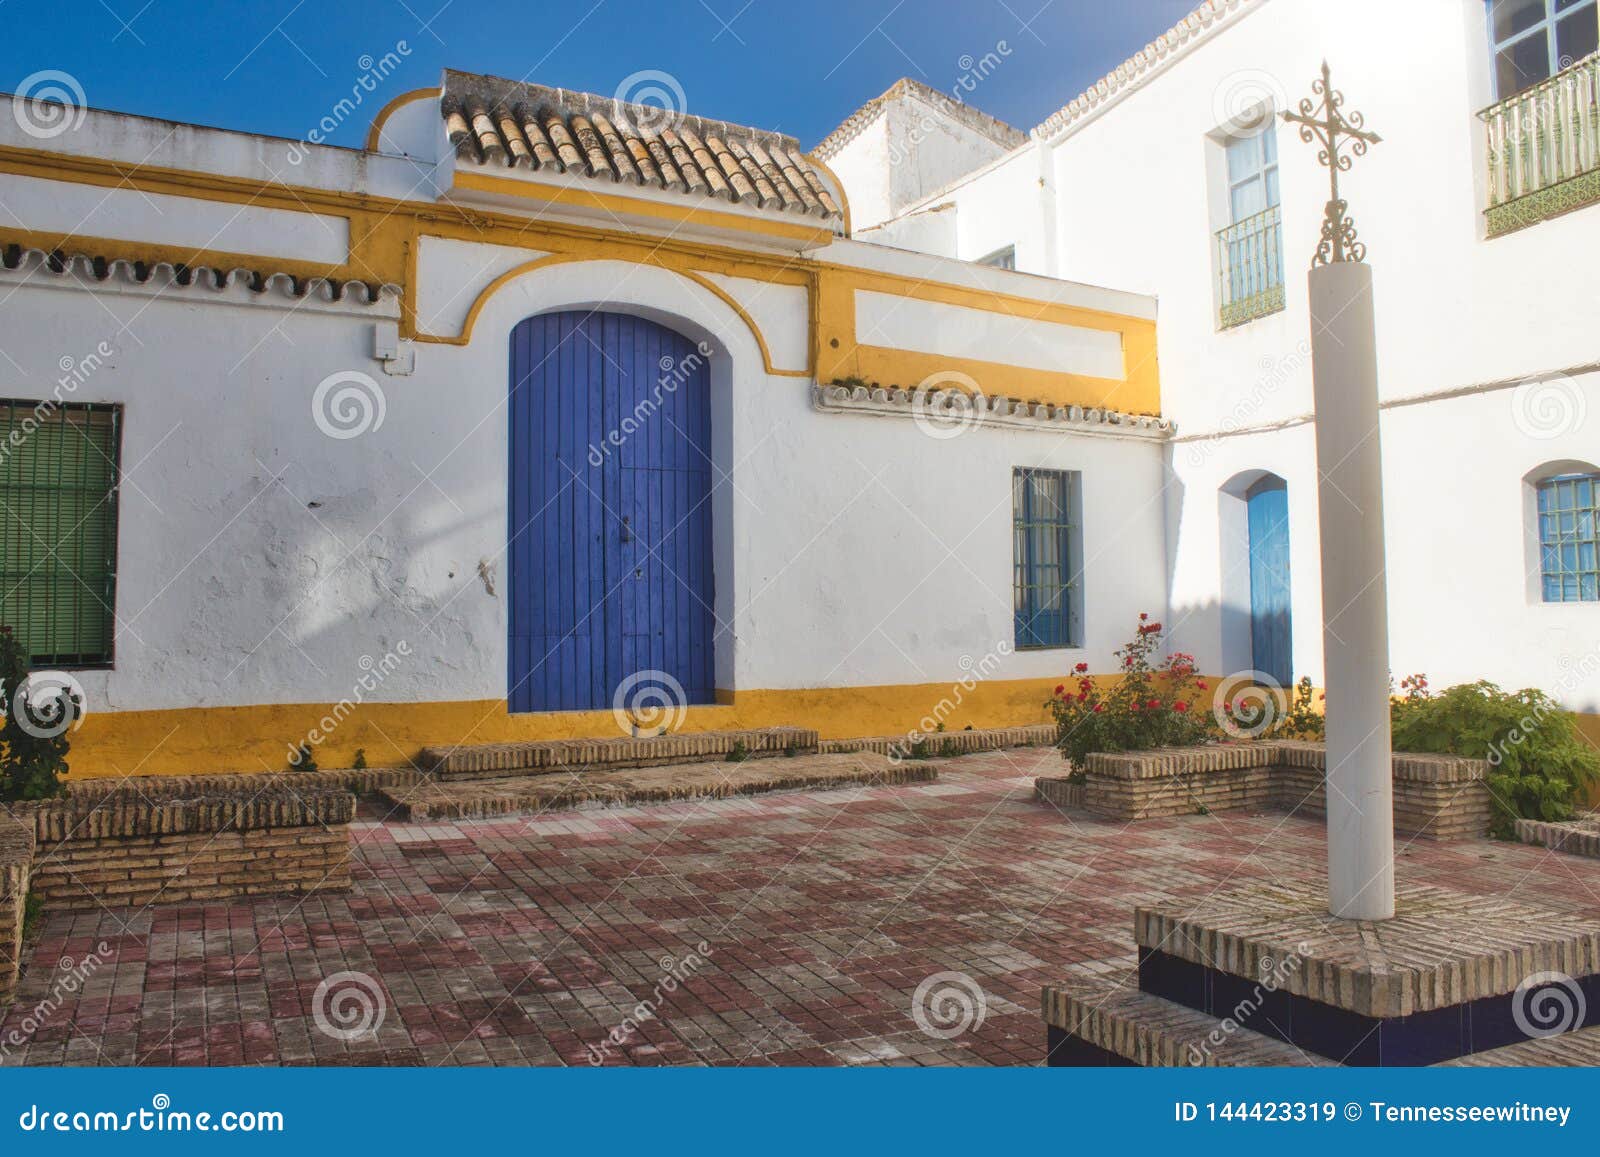 spanish brightly colored courtyard in the sun with an ornate cross on a column